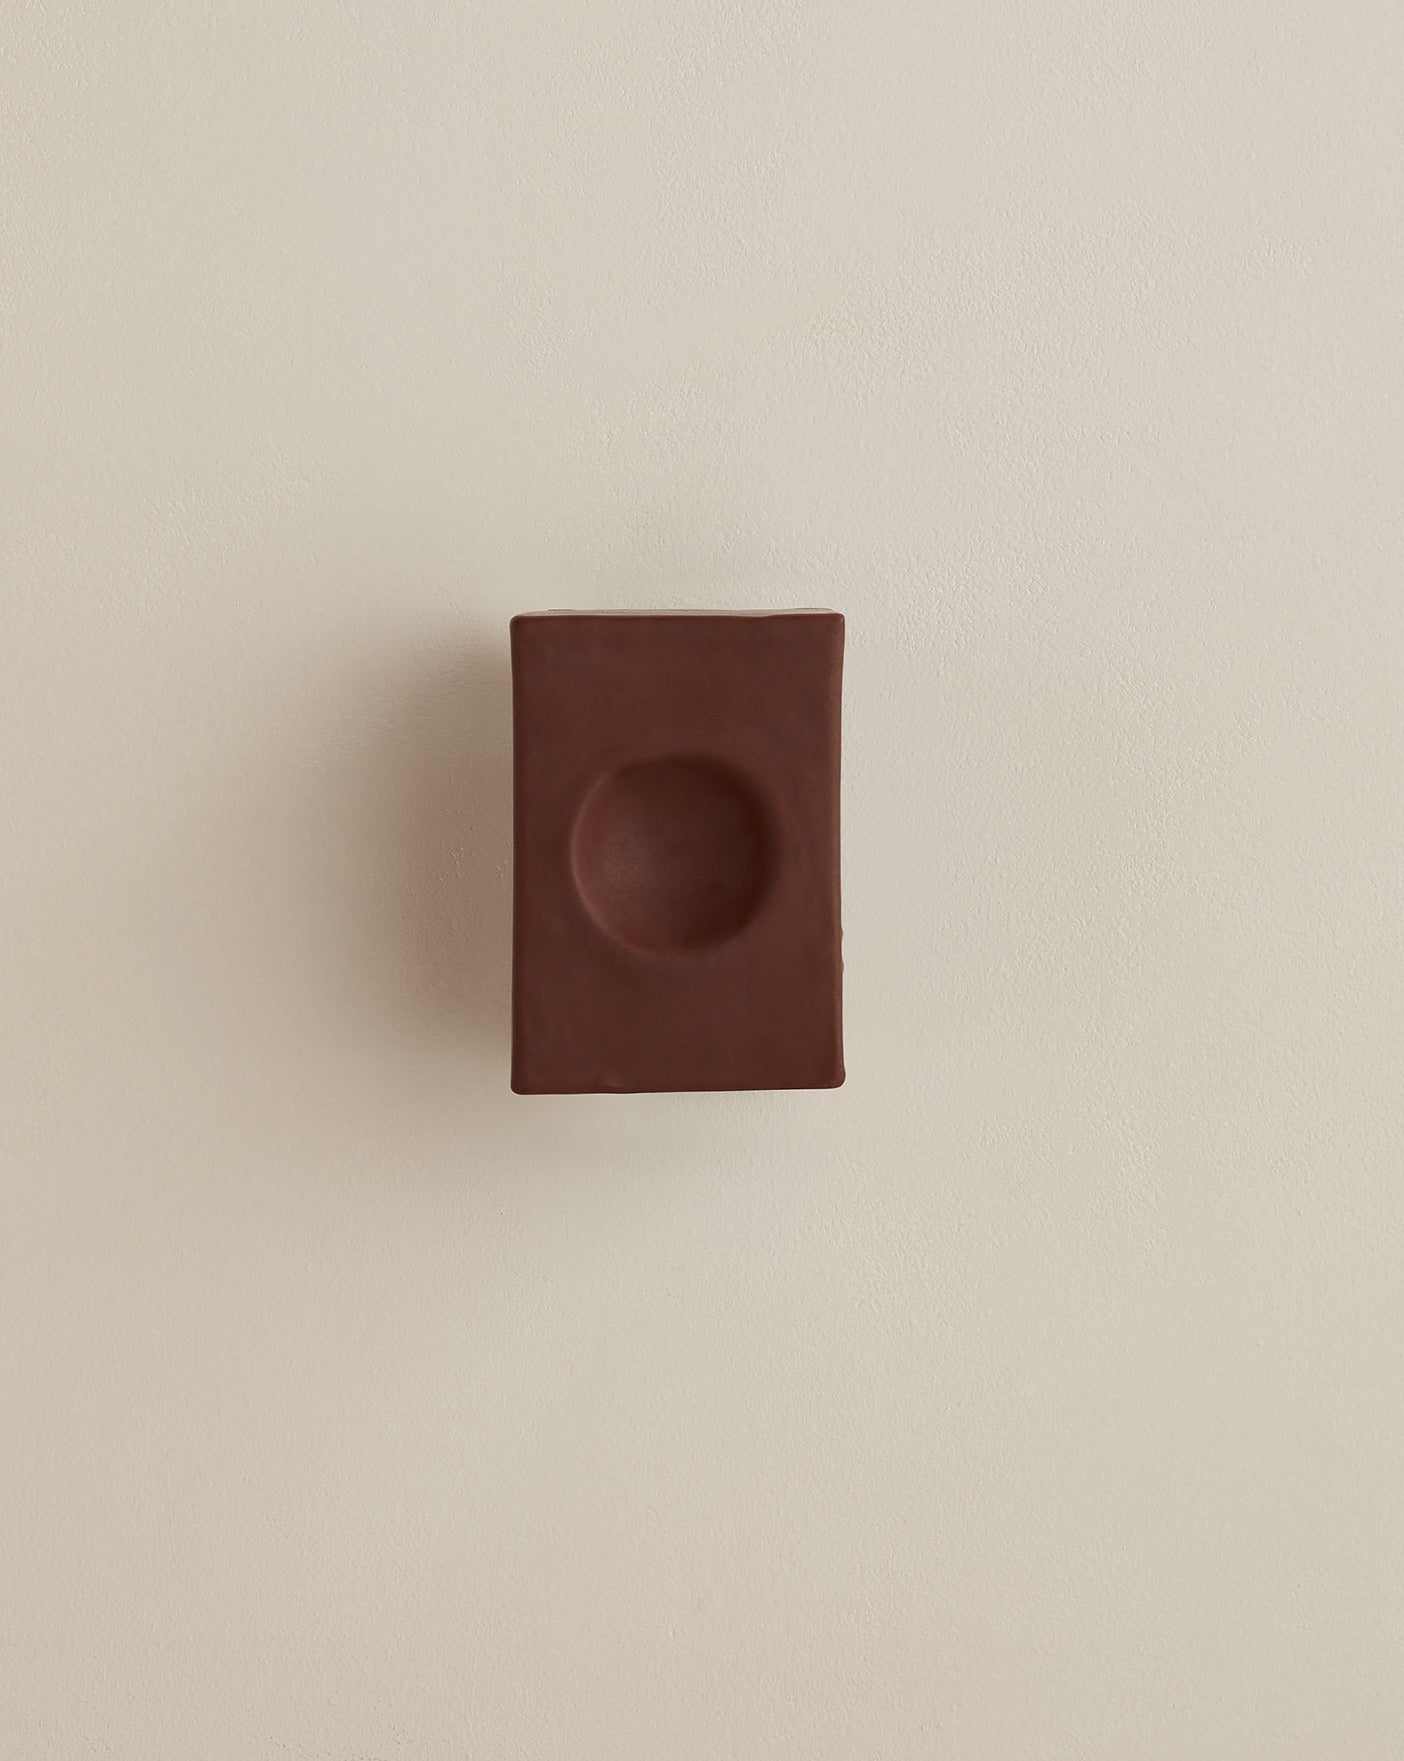 Luca Wall Sconce, Artist Edition II in Chestnut